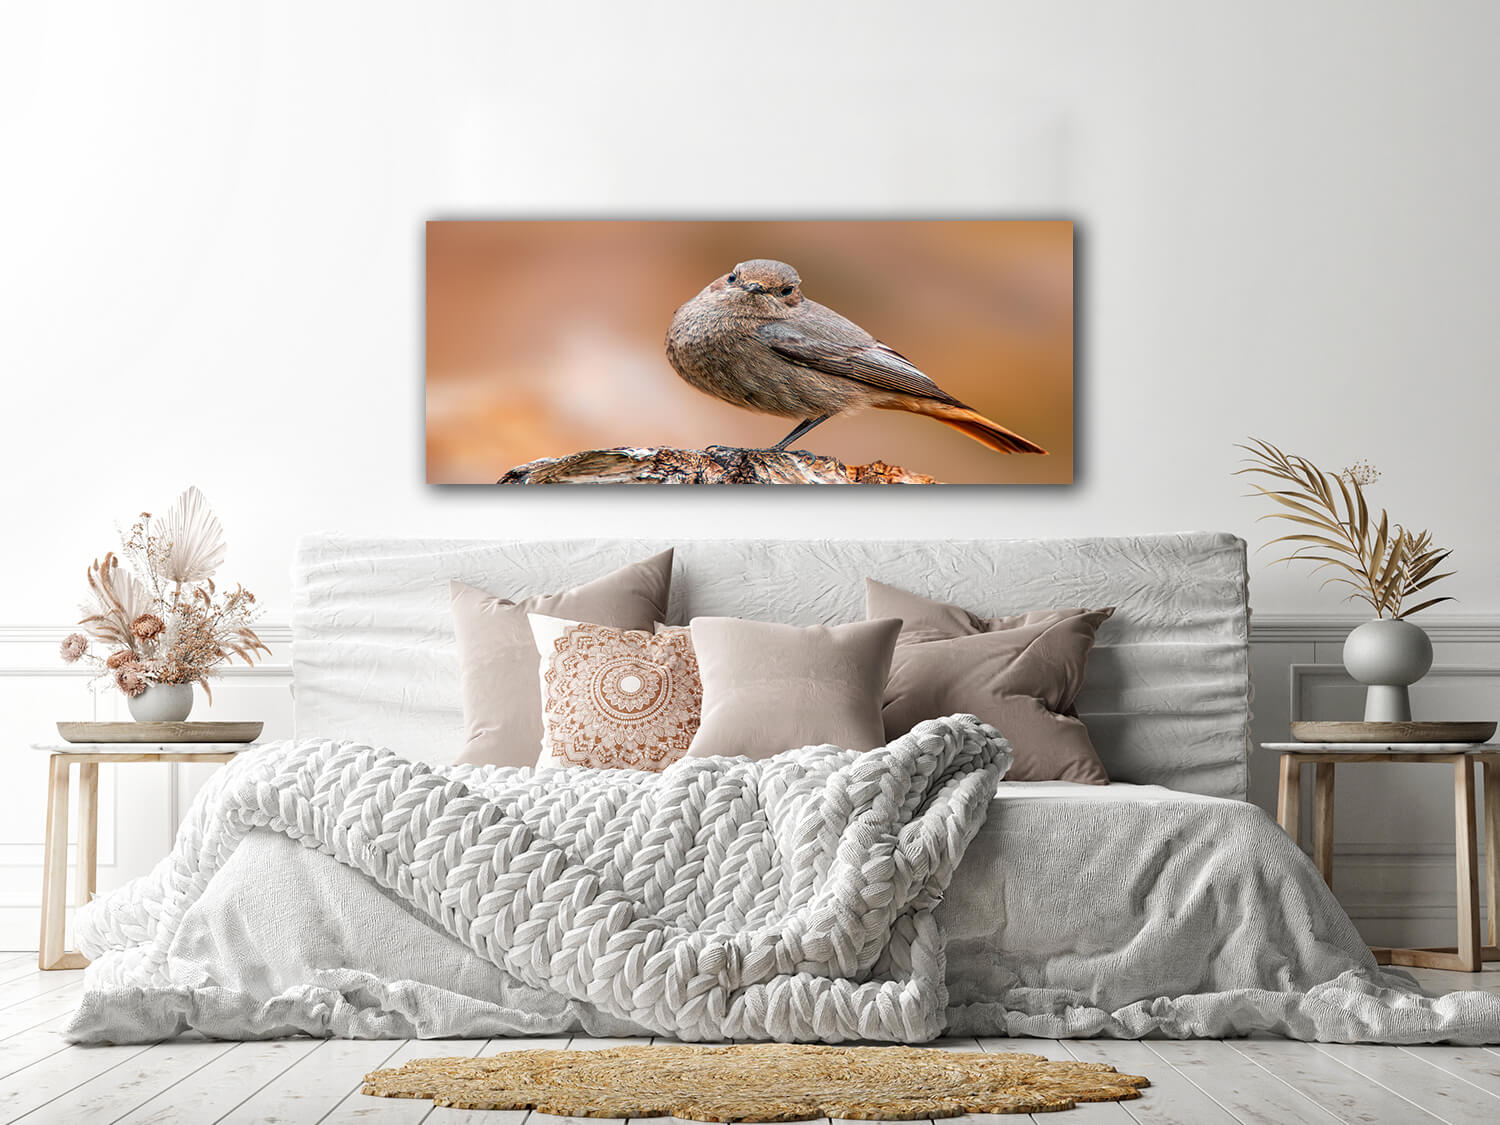 WEB001_0073_MOCKUPs_0044_36201828_beautiful colorful bird sits and looks AOAY6006